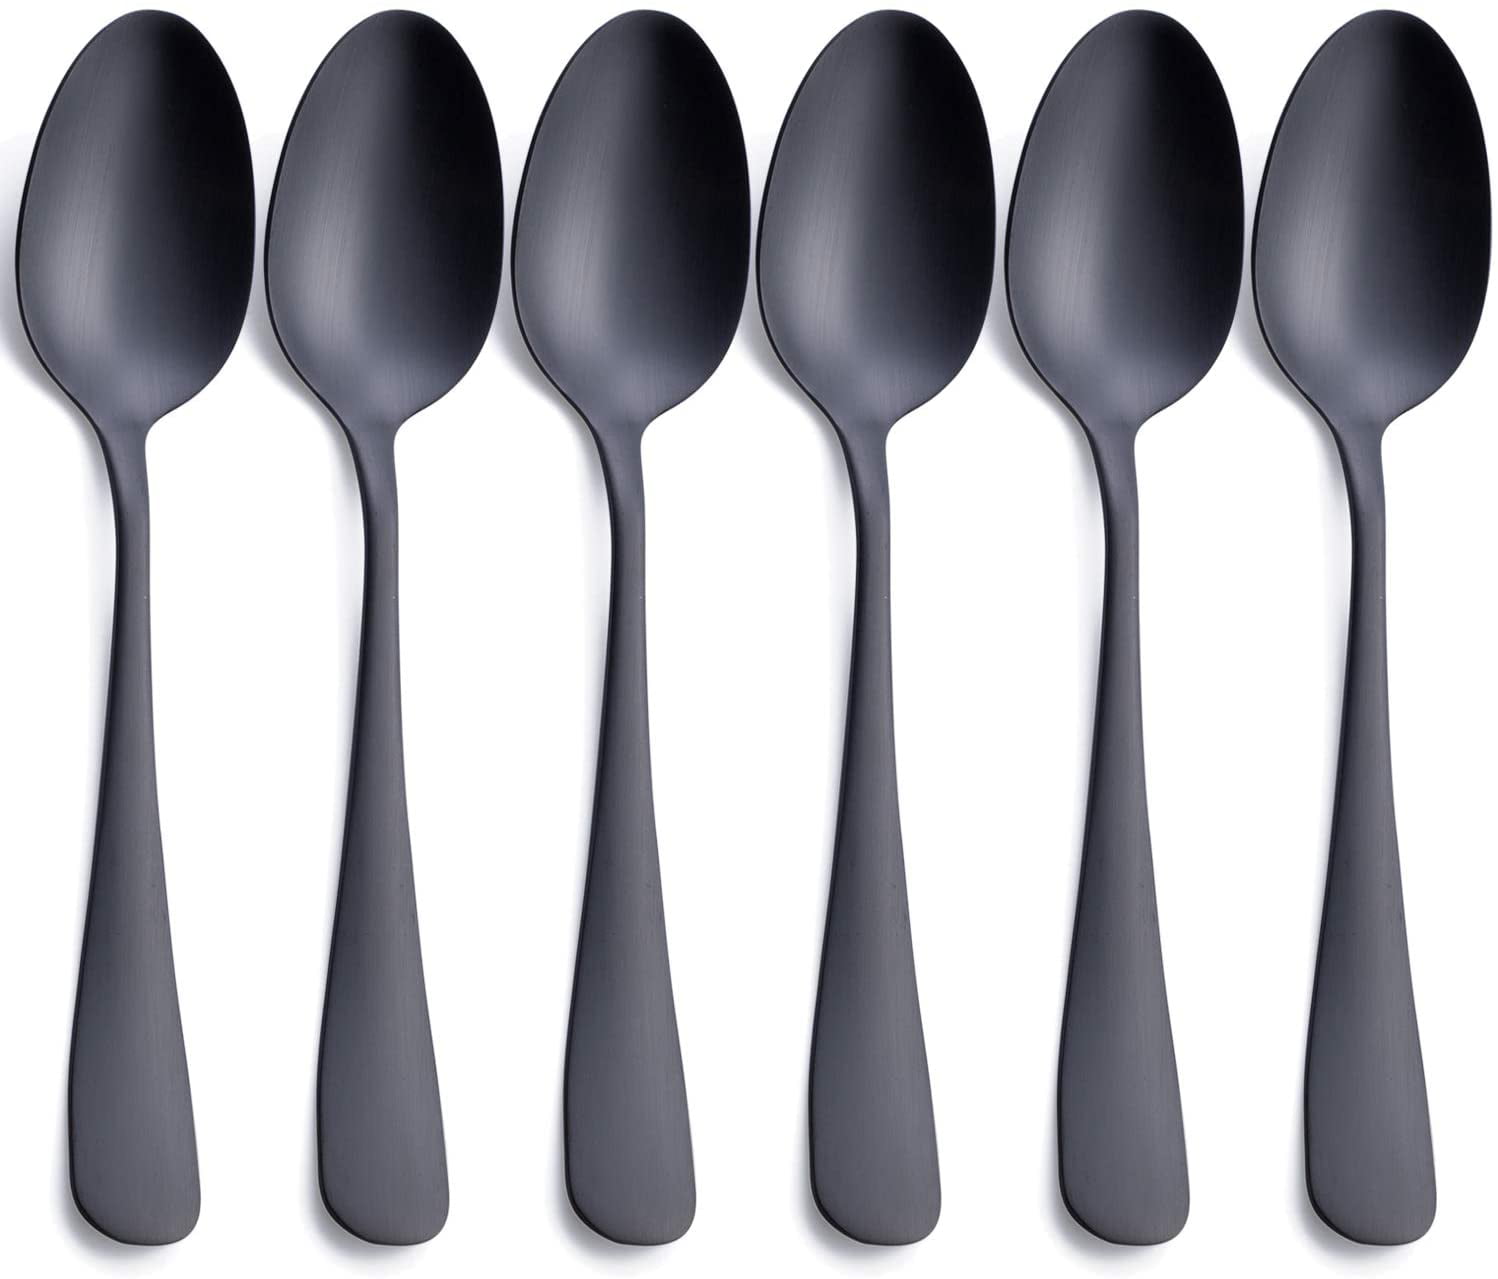 Mirror Finish & Dishwasher Safe Dinner Spoons Set of 6,Stainless Steel Silverware Flatware Cutlery Spoons Table Spoons 8 Inches 